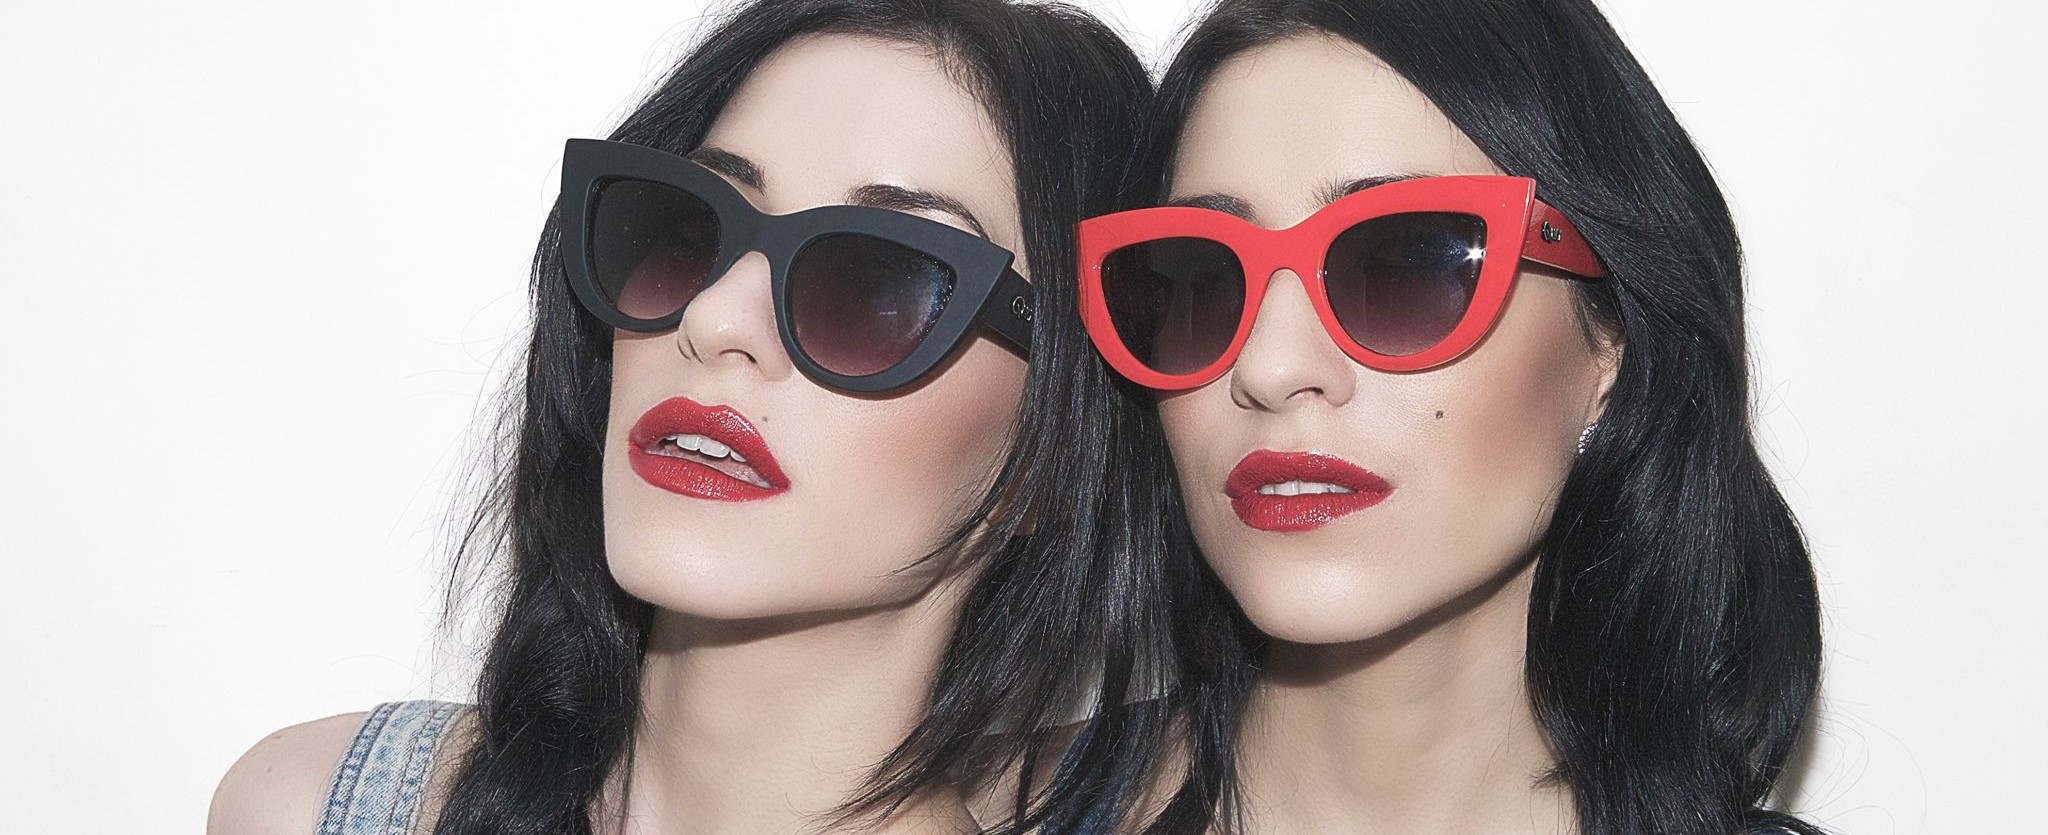 The Veronicas set to Release Self-Titled Album November 21st!